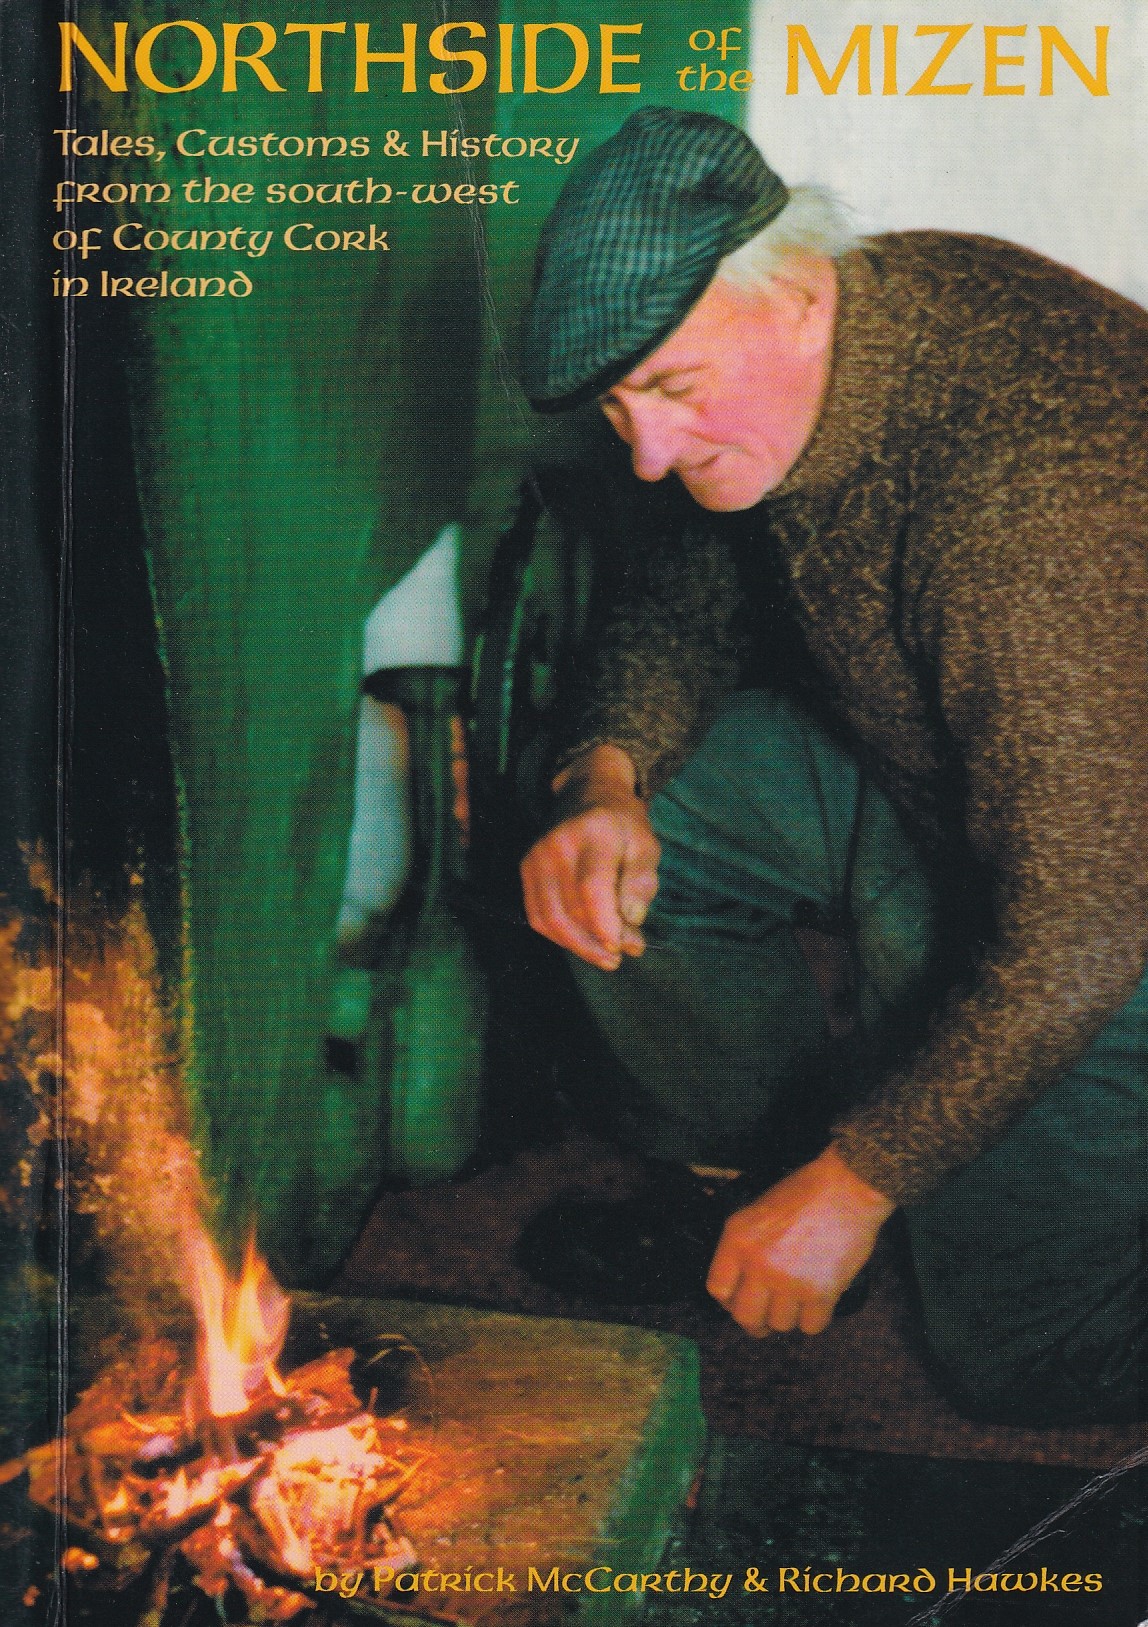 Northside of the Mizen: Tales, Customs and History of County Cork in Ireland by Patrick McCarthy & Richard Hawkes